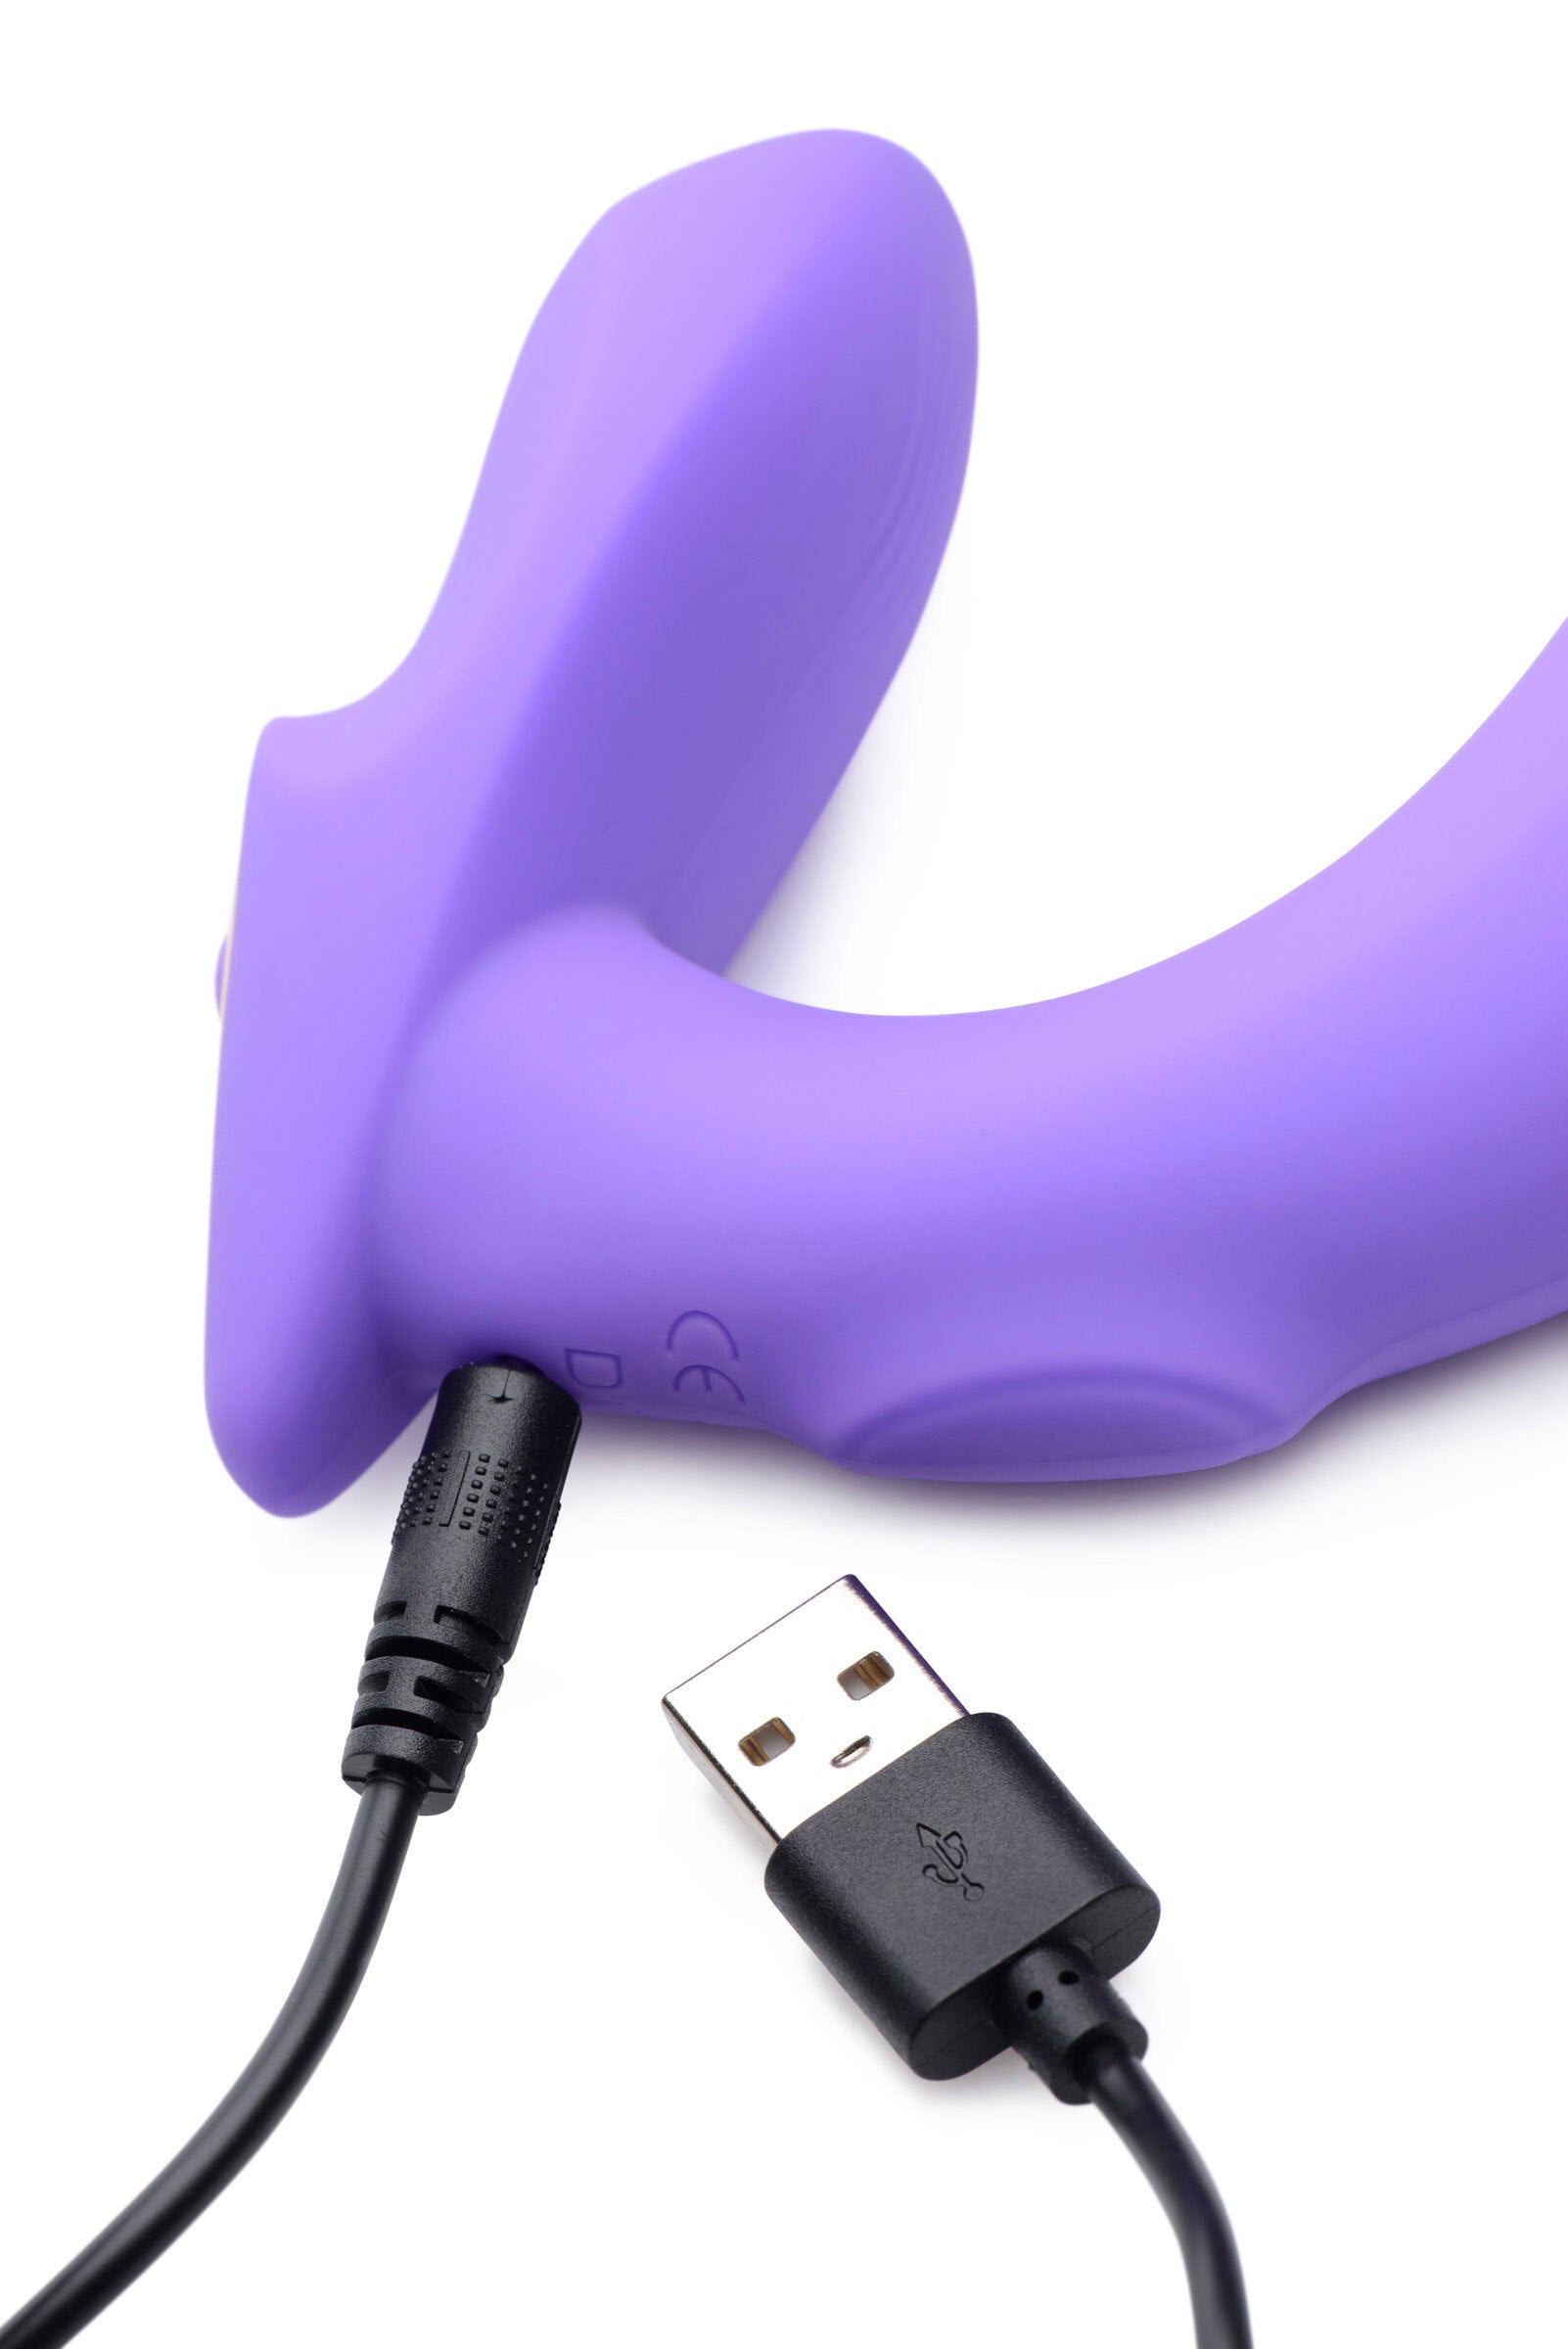 10x G-Tap Tapping Silicone G-Spot Vibrator - Purple
Enjoy an explosion of clitoral bliss! Designed for enhanced grip and equipped with a powerful sucking feature to thrill and please. 7 sucking intensity levels. discreet vibrators, hot sellers, sex toys
Remote Controlled Stimulators